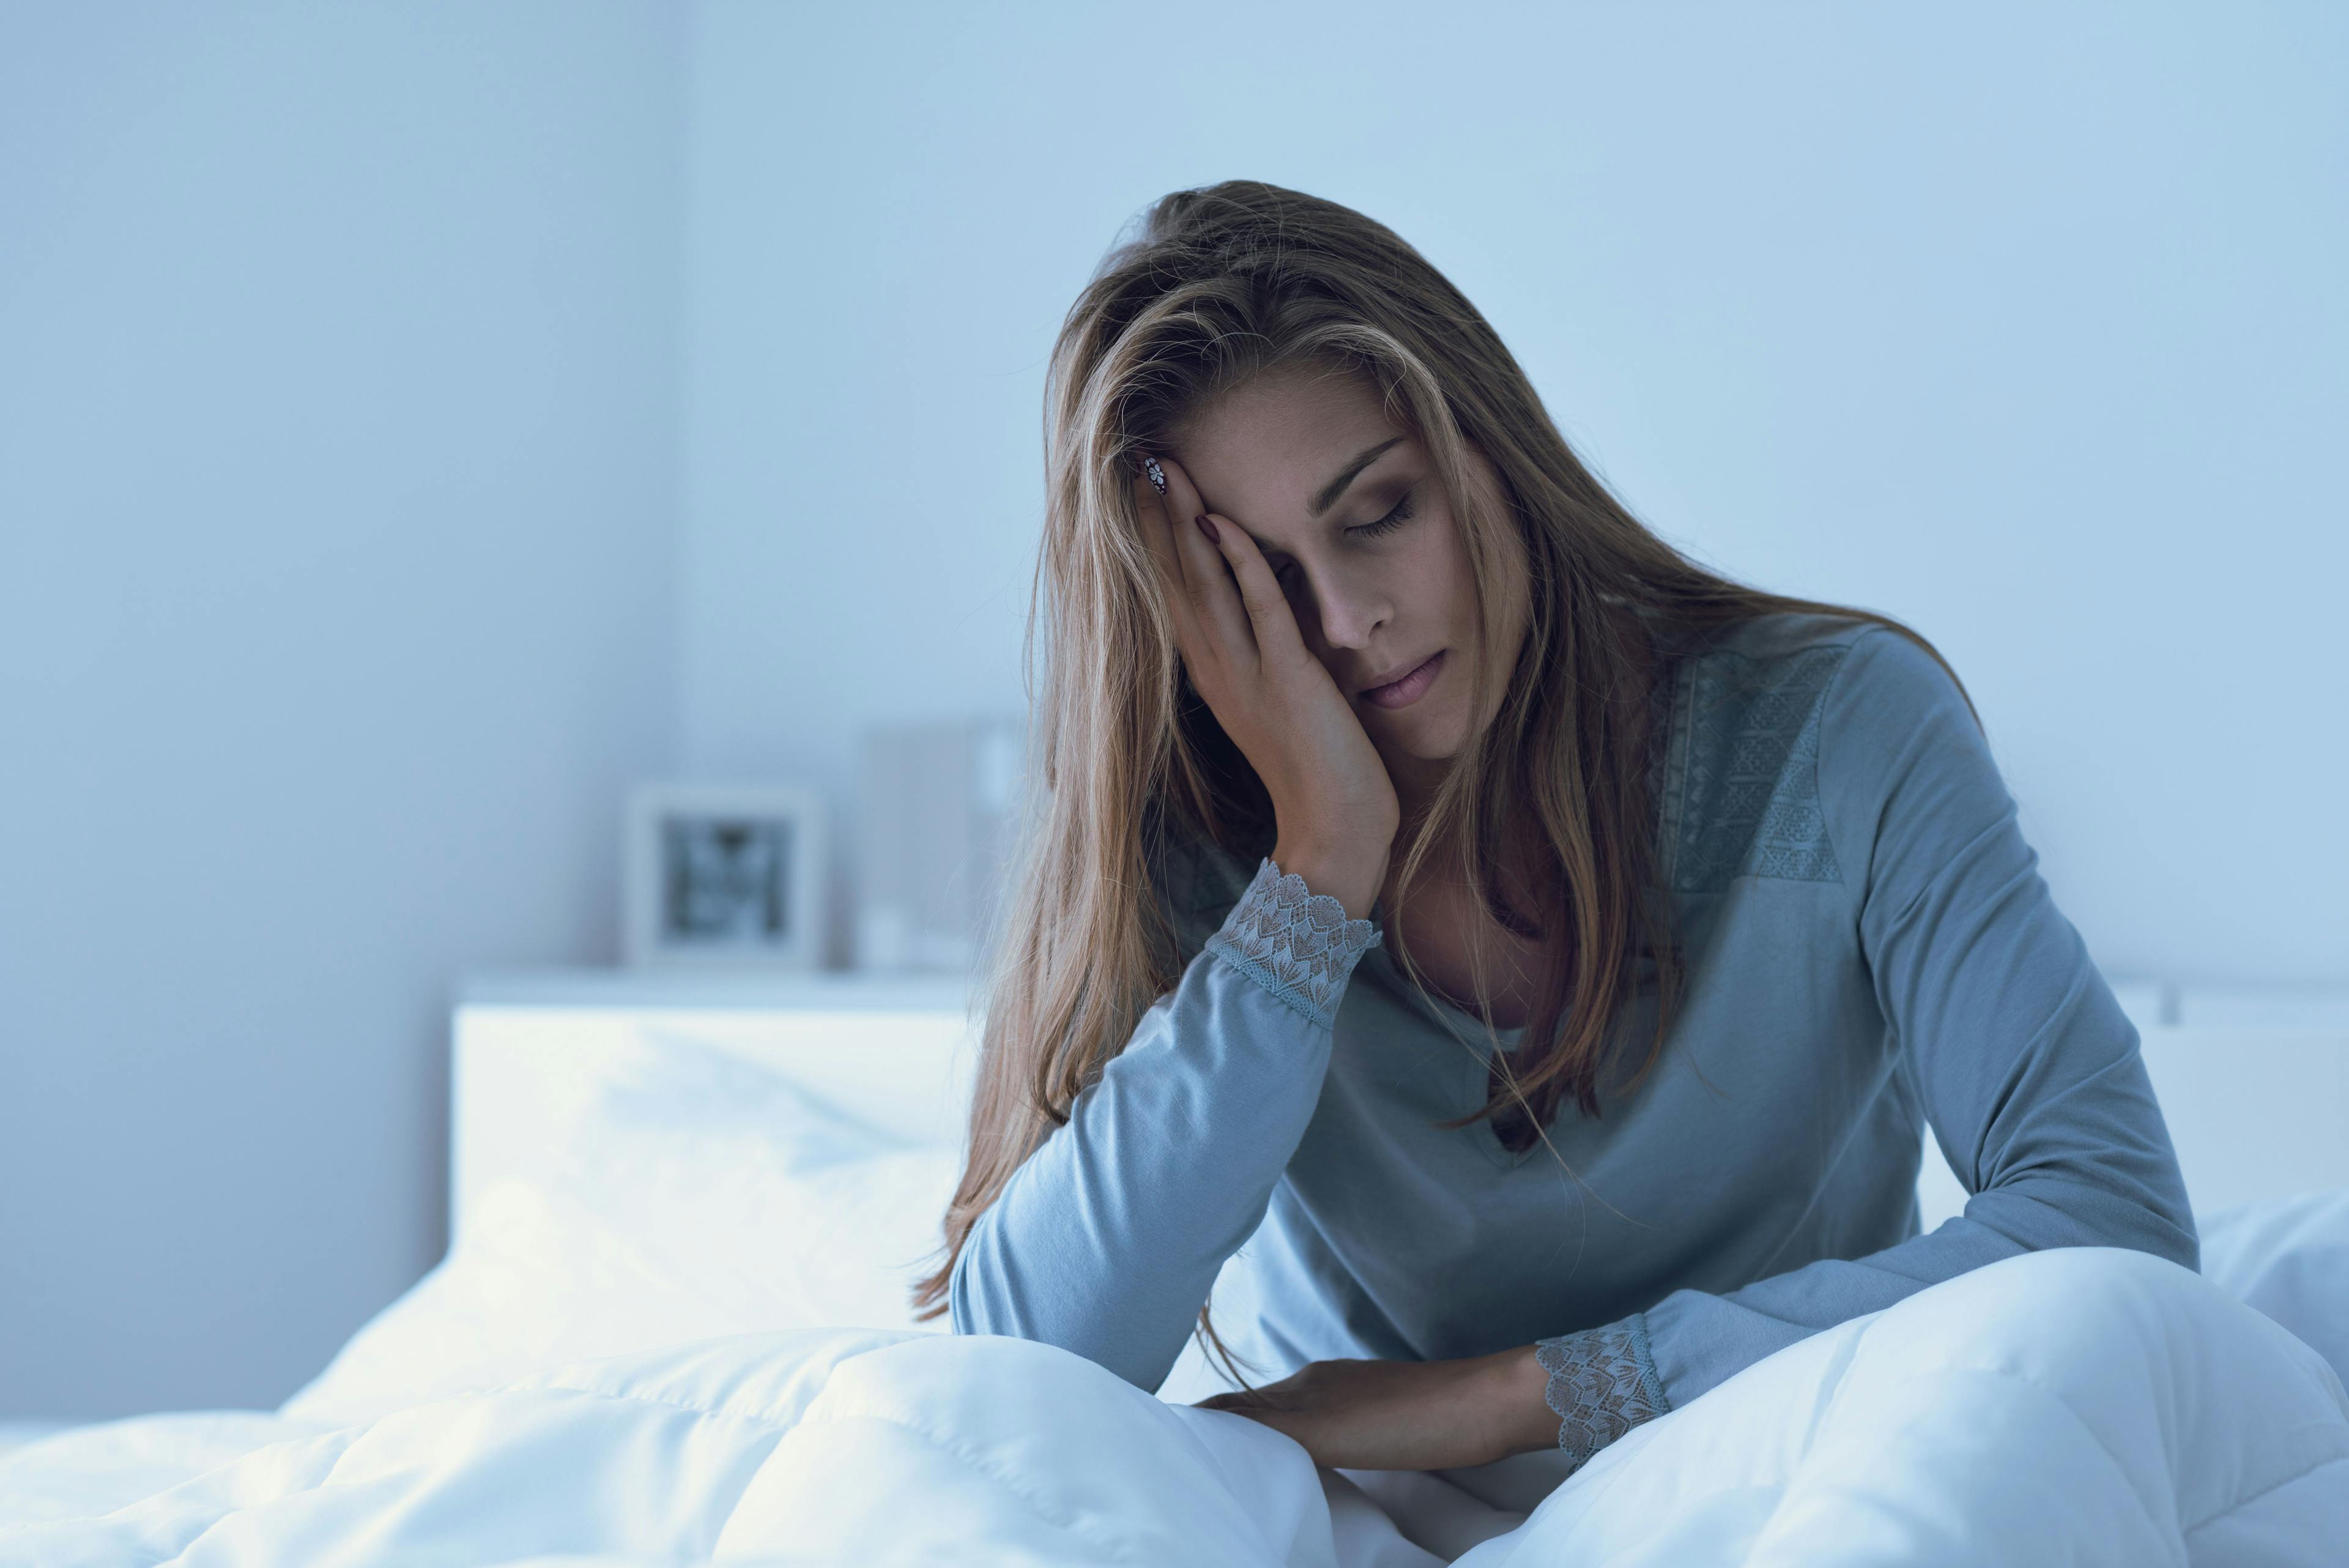 High Rates of Fatigue Reported in Patients with PsA, Negatively Impacting Quality of Life